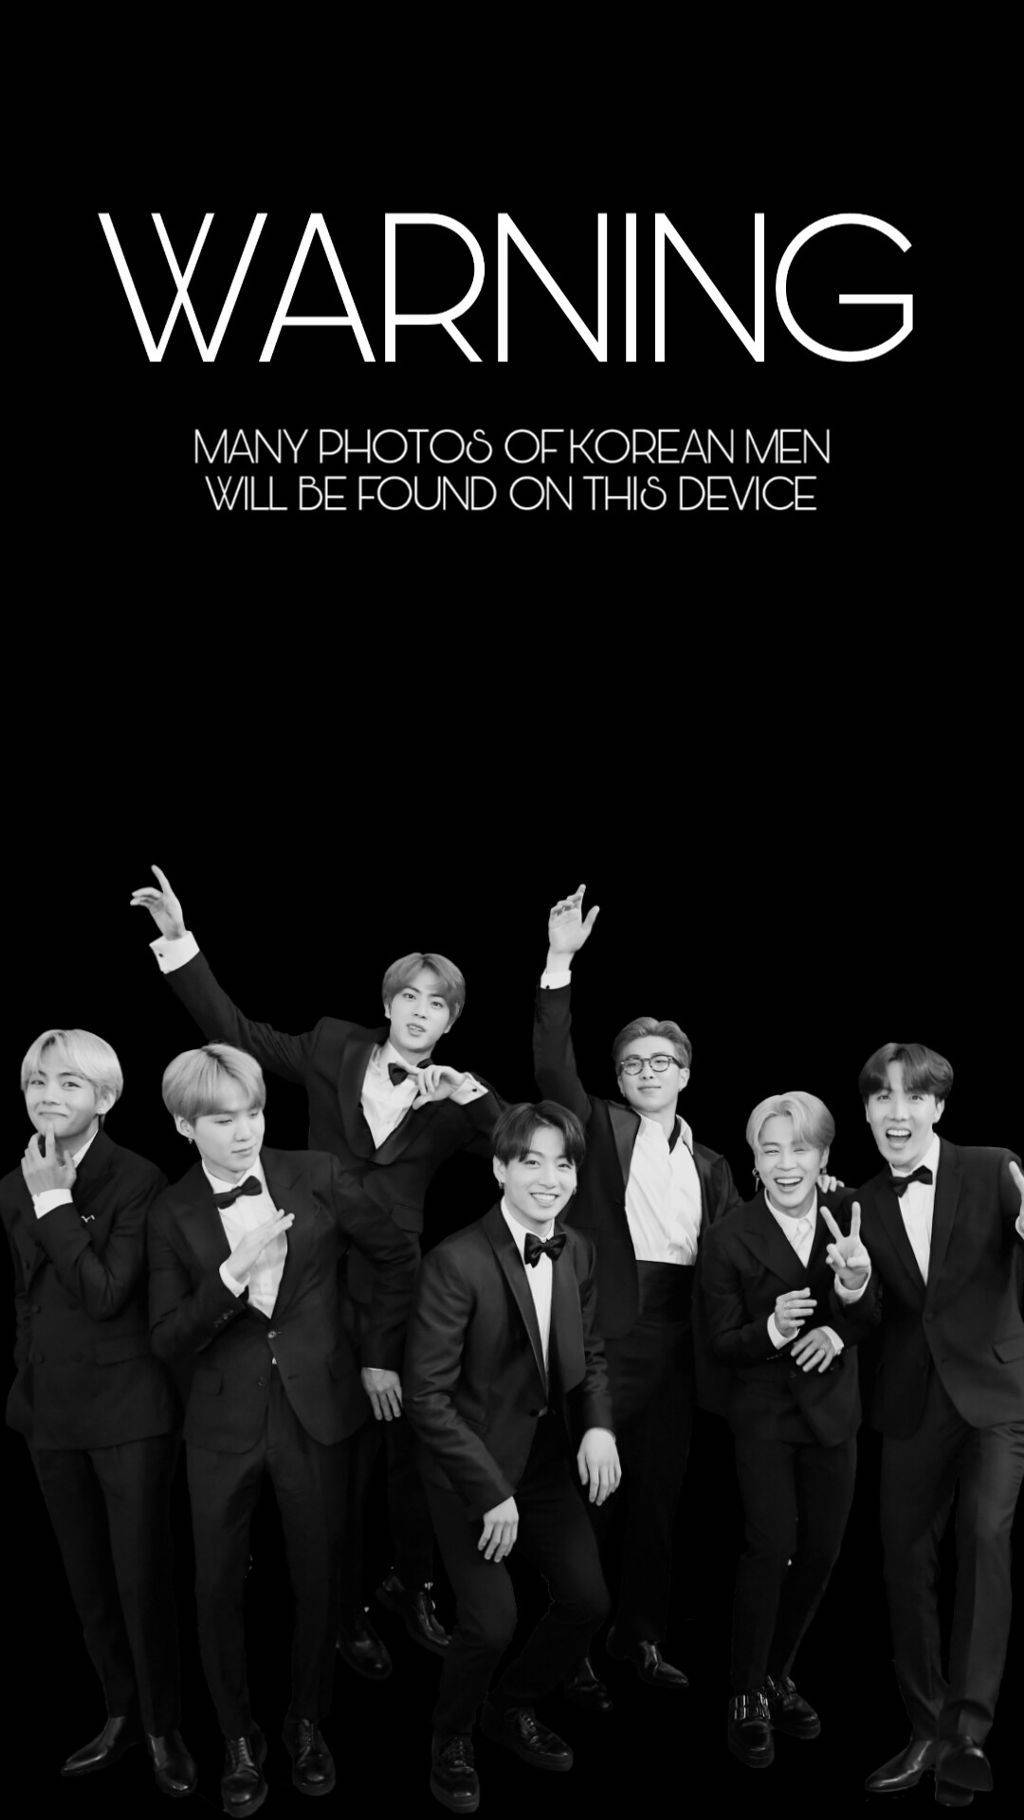 Free Bts Phone Wallpaper Downloads, [100+] Bts Phone Wallpapers for FREE |  